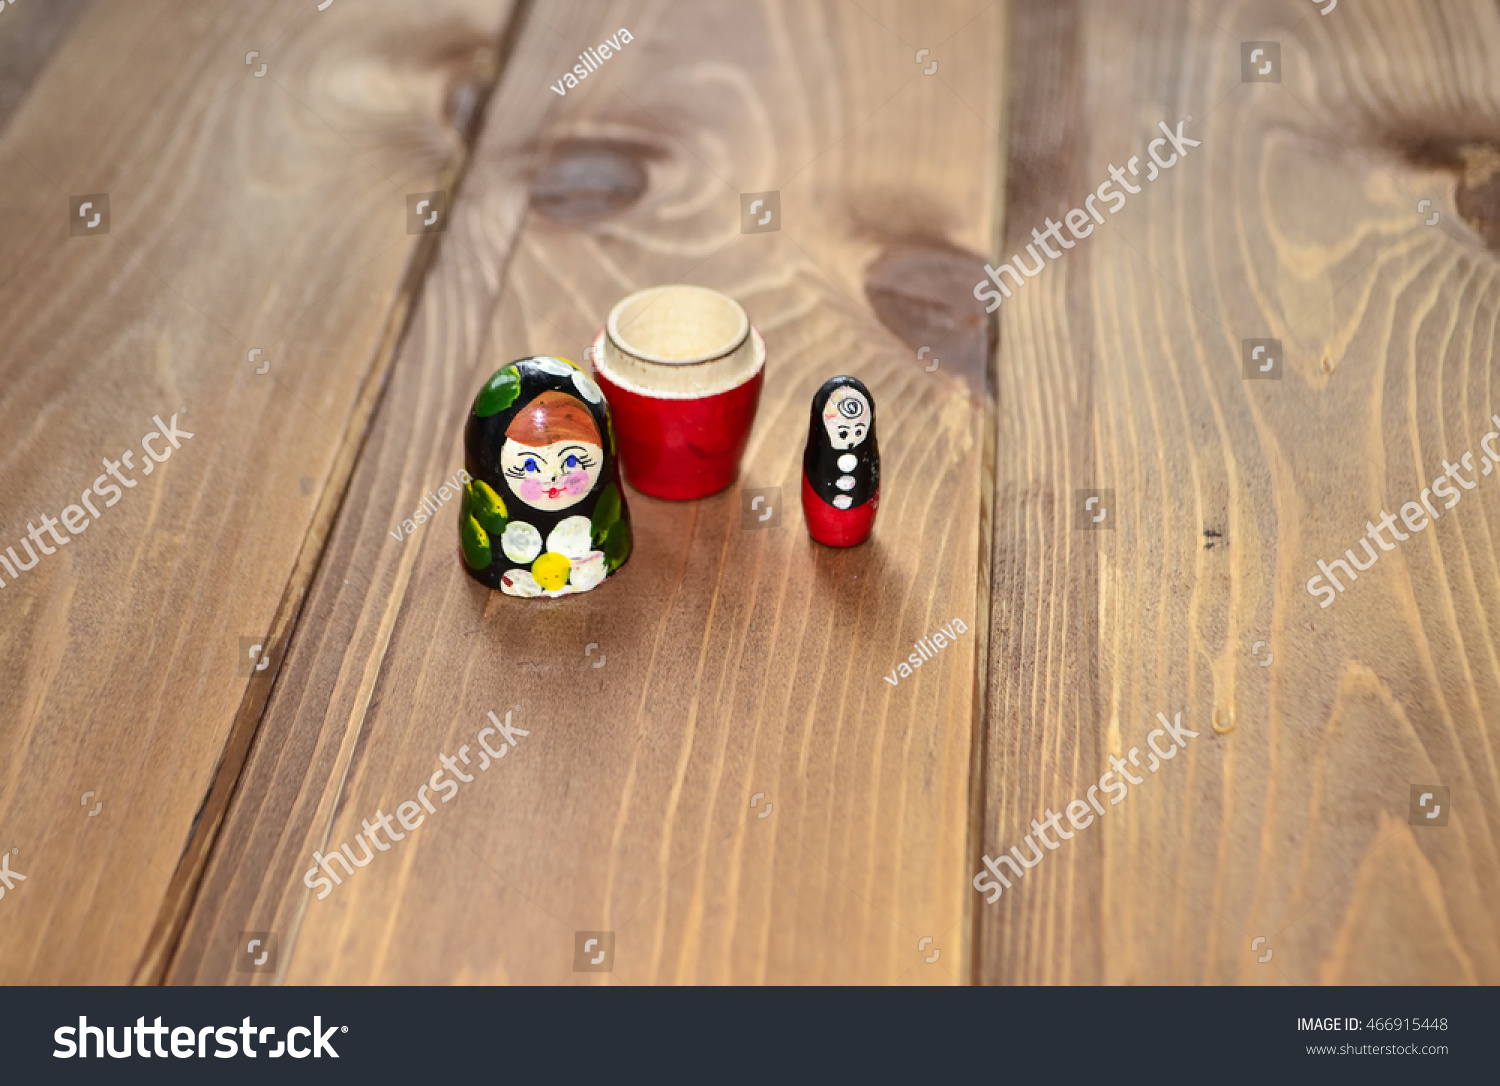 wooden doll stand